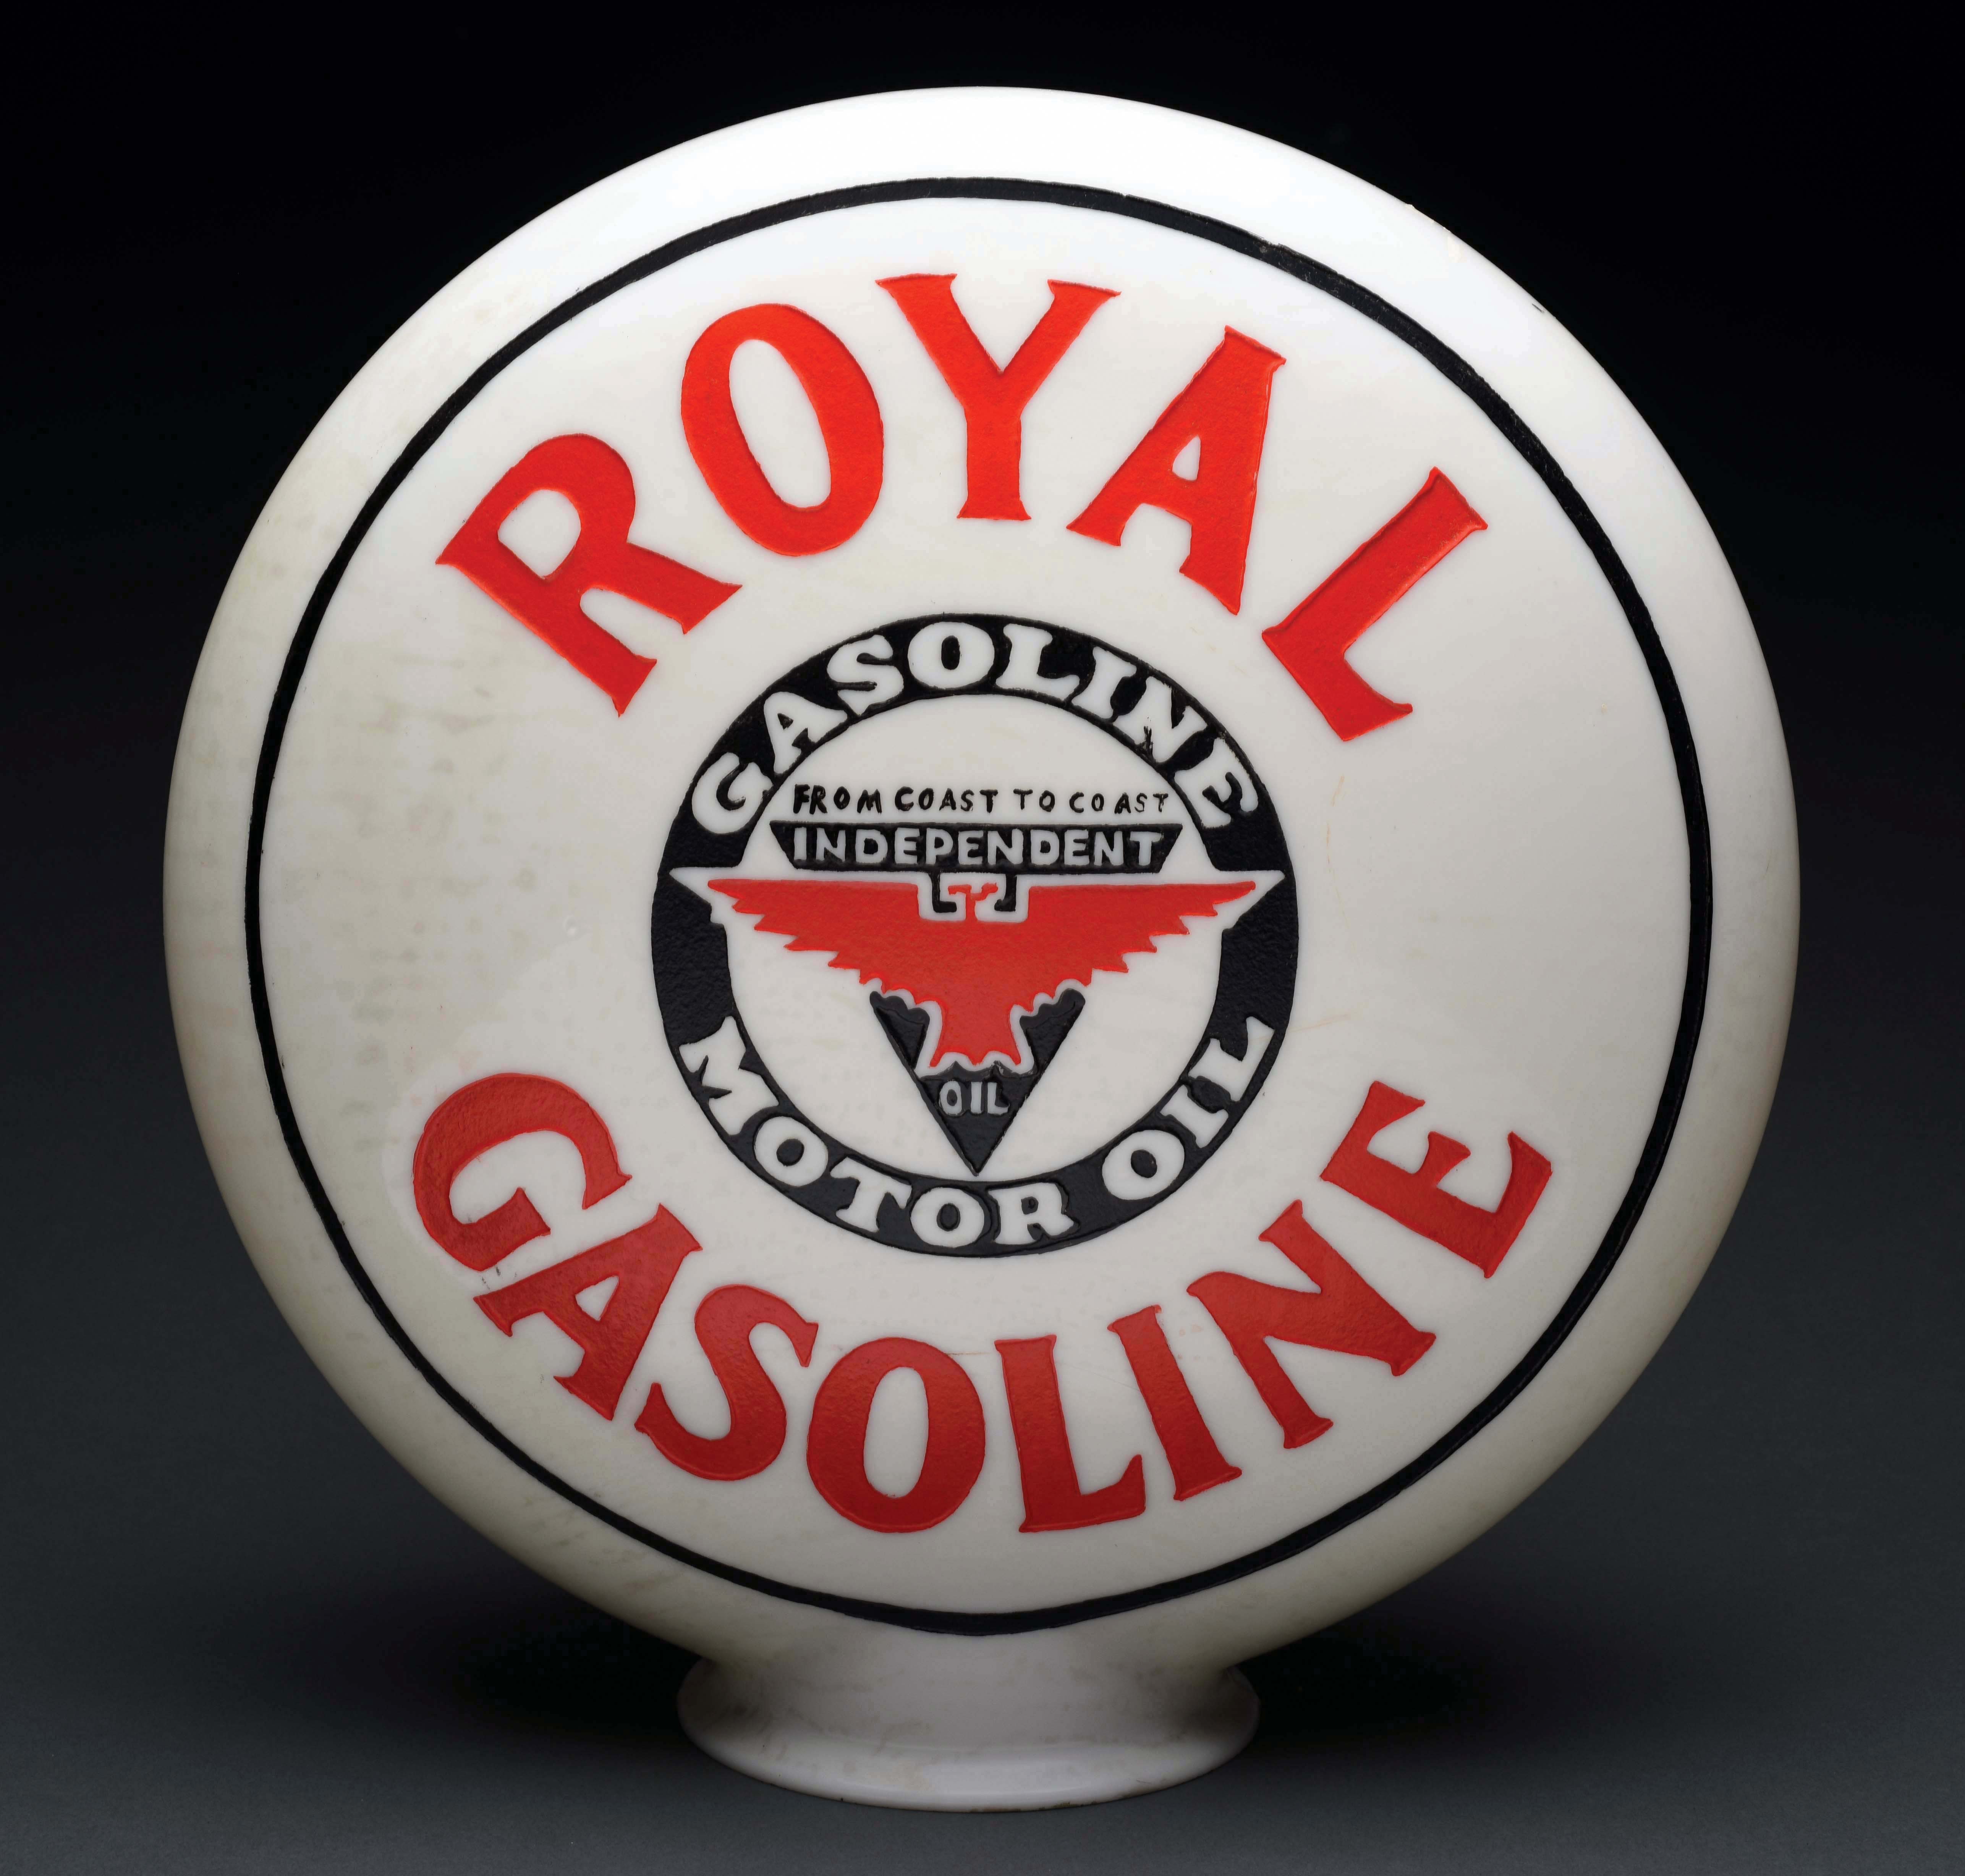 auction, 750 gas pumps and globes, vintage signs on auction docket, ClassicCars.com Journal